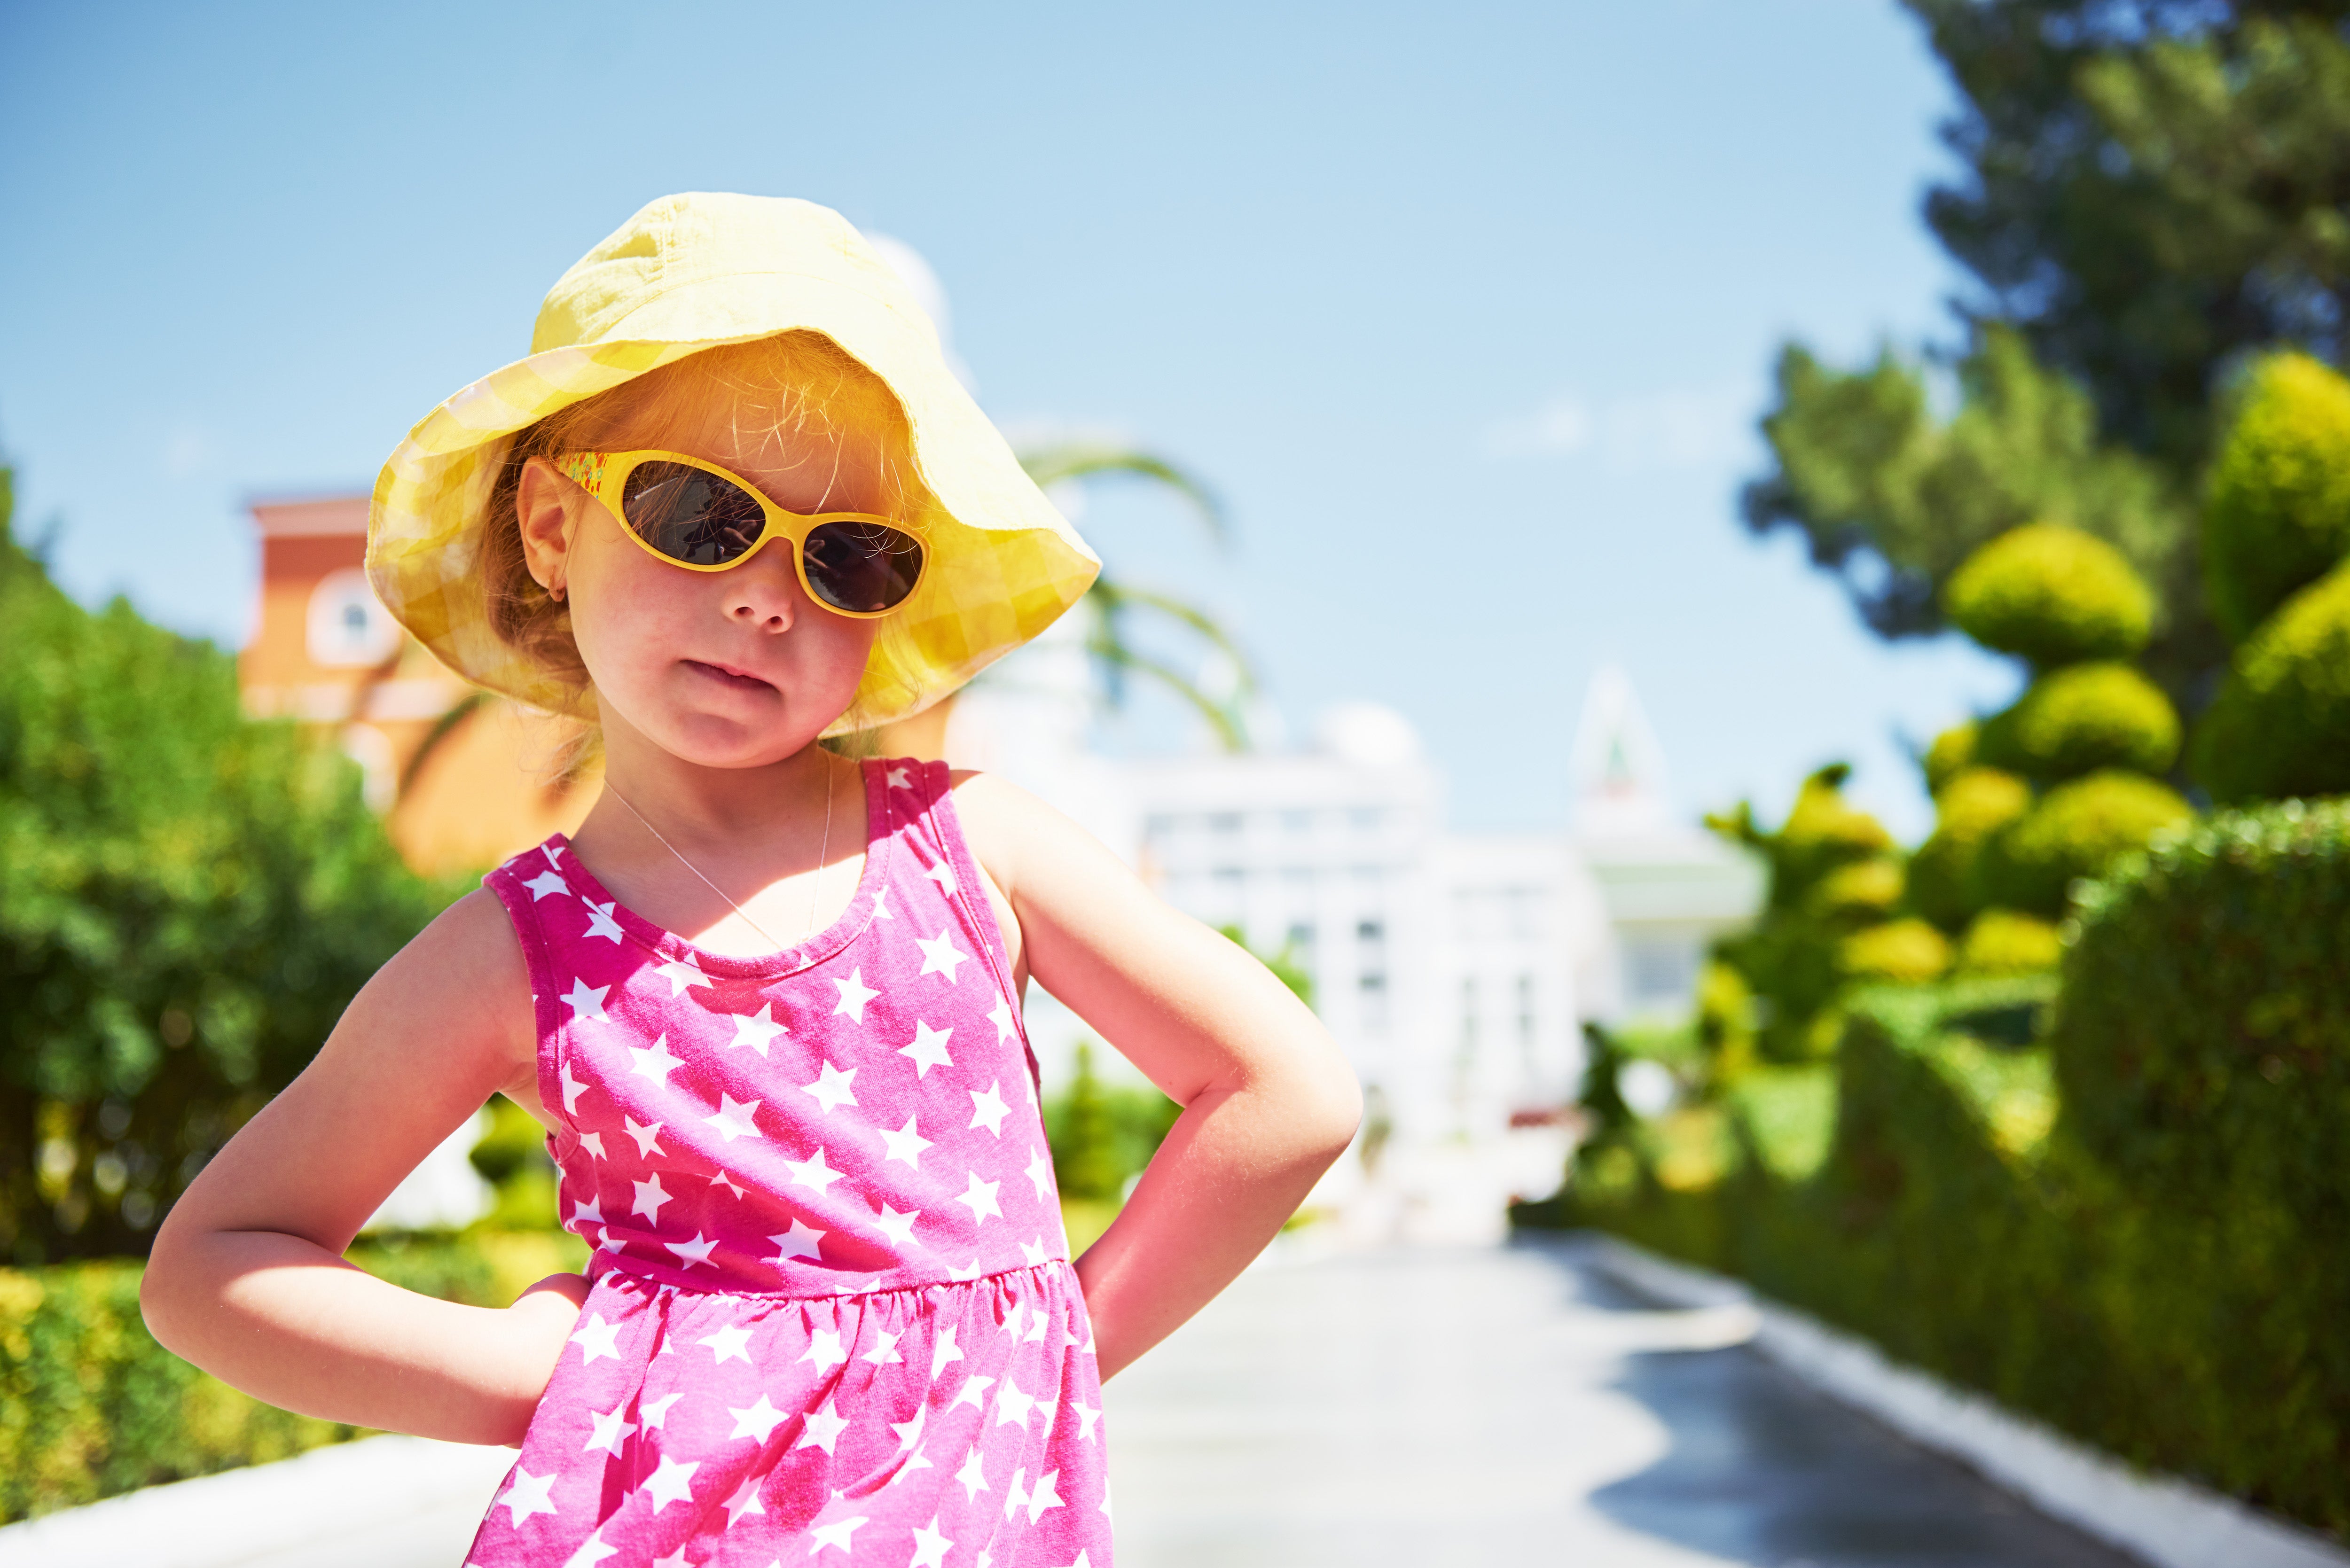 Transitioning your kid’s wardrobe from Winter to Summer